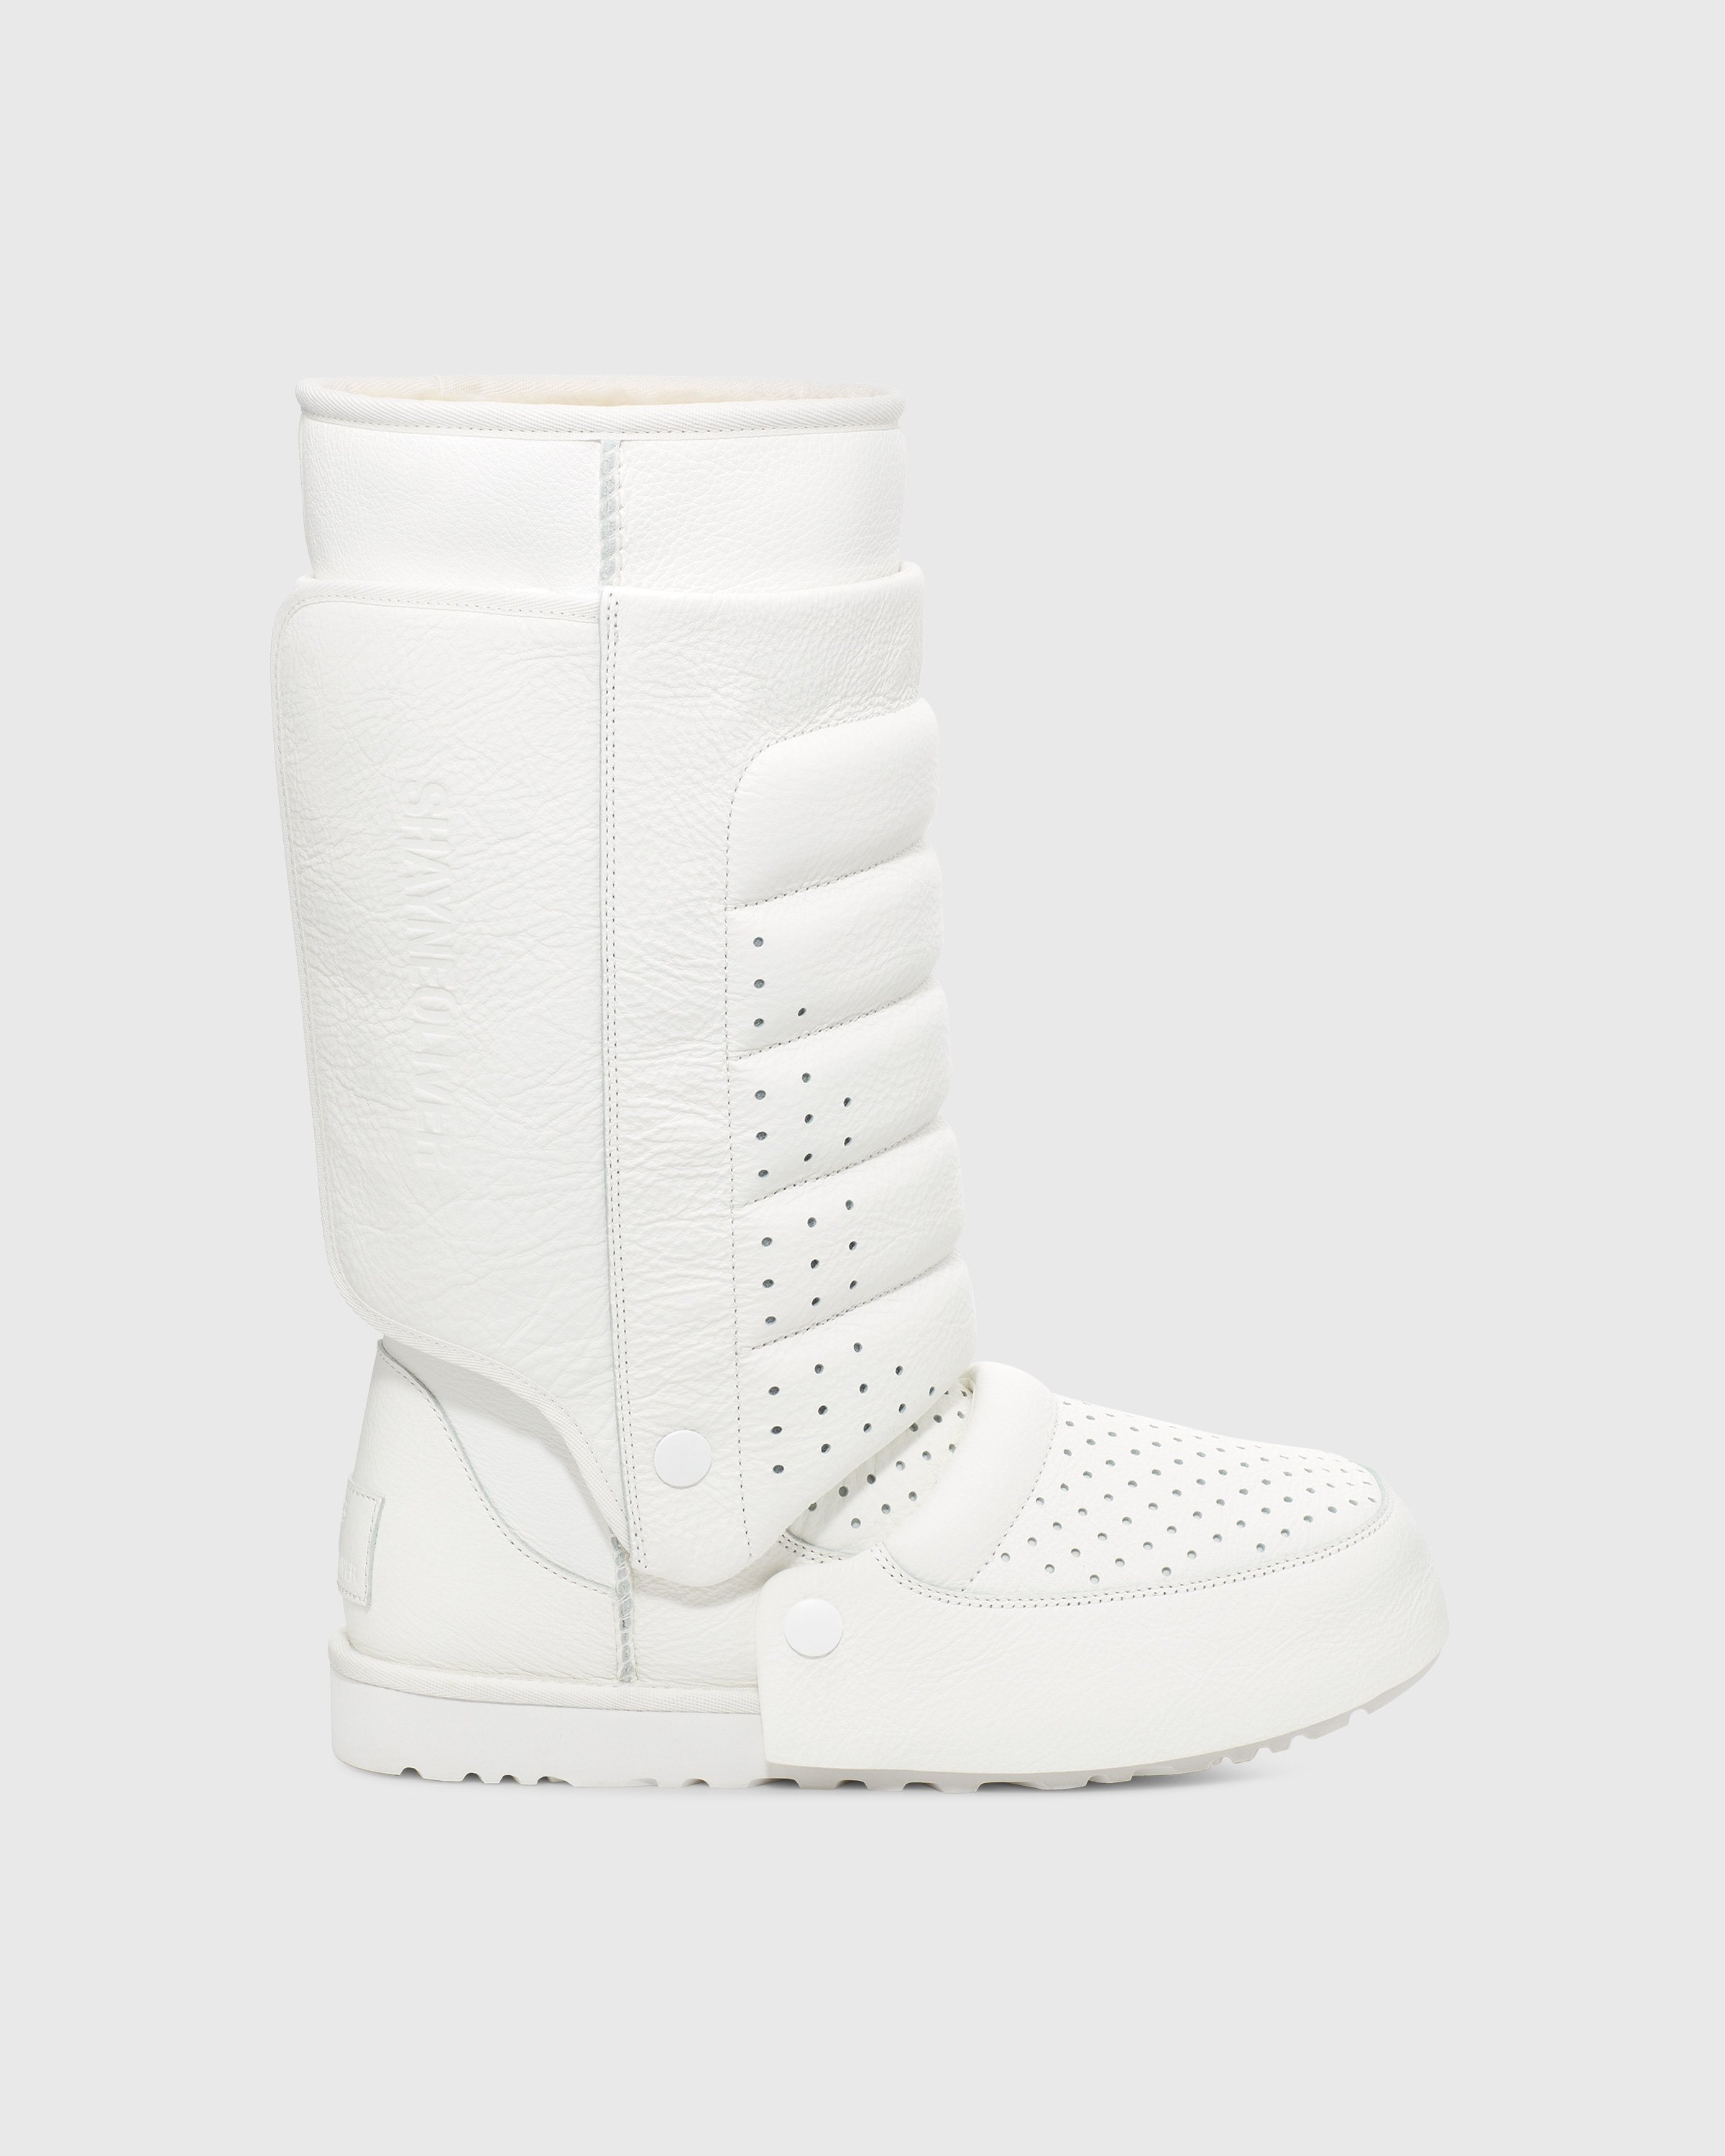 Ugg x Shayne Oliver - Tall Boot White - Footwear - White - Image 1